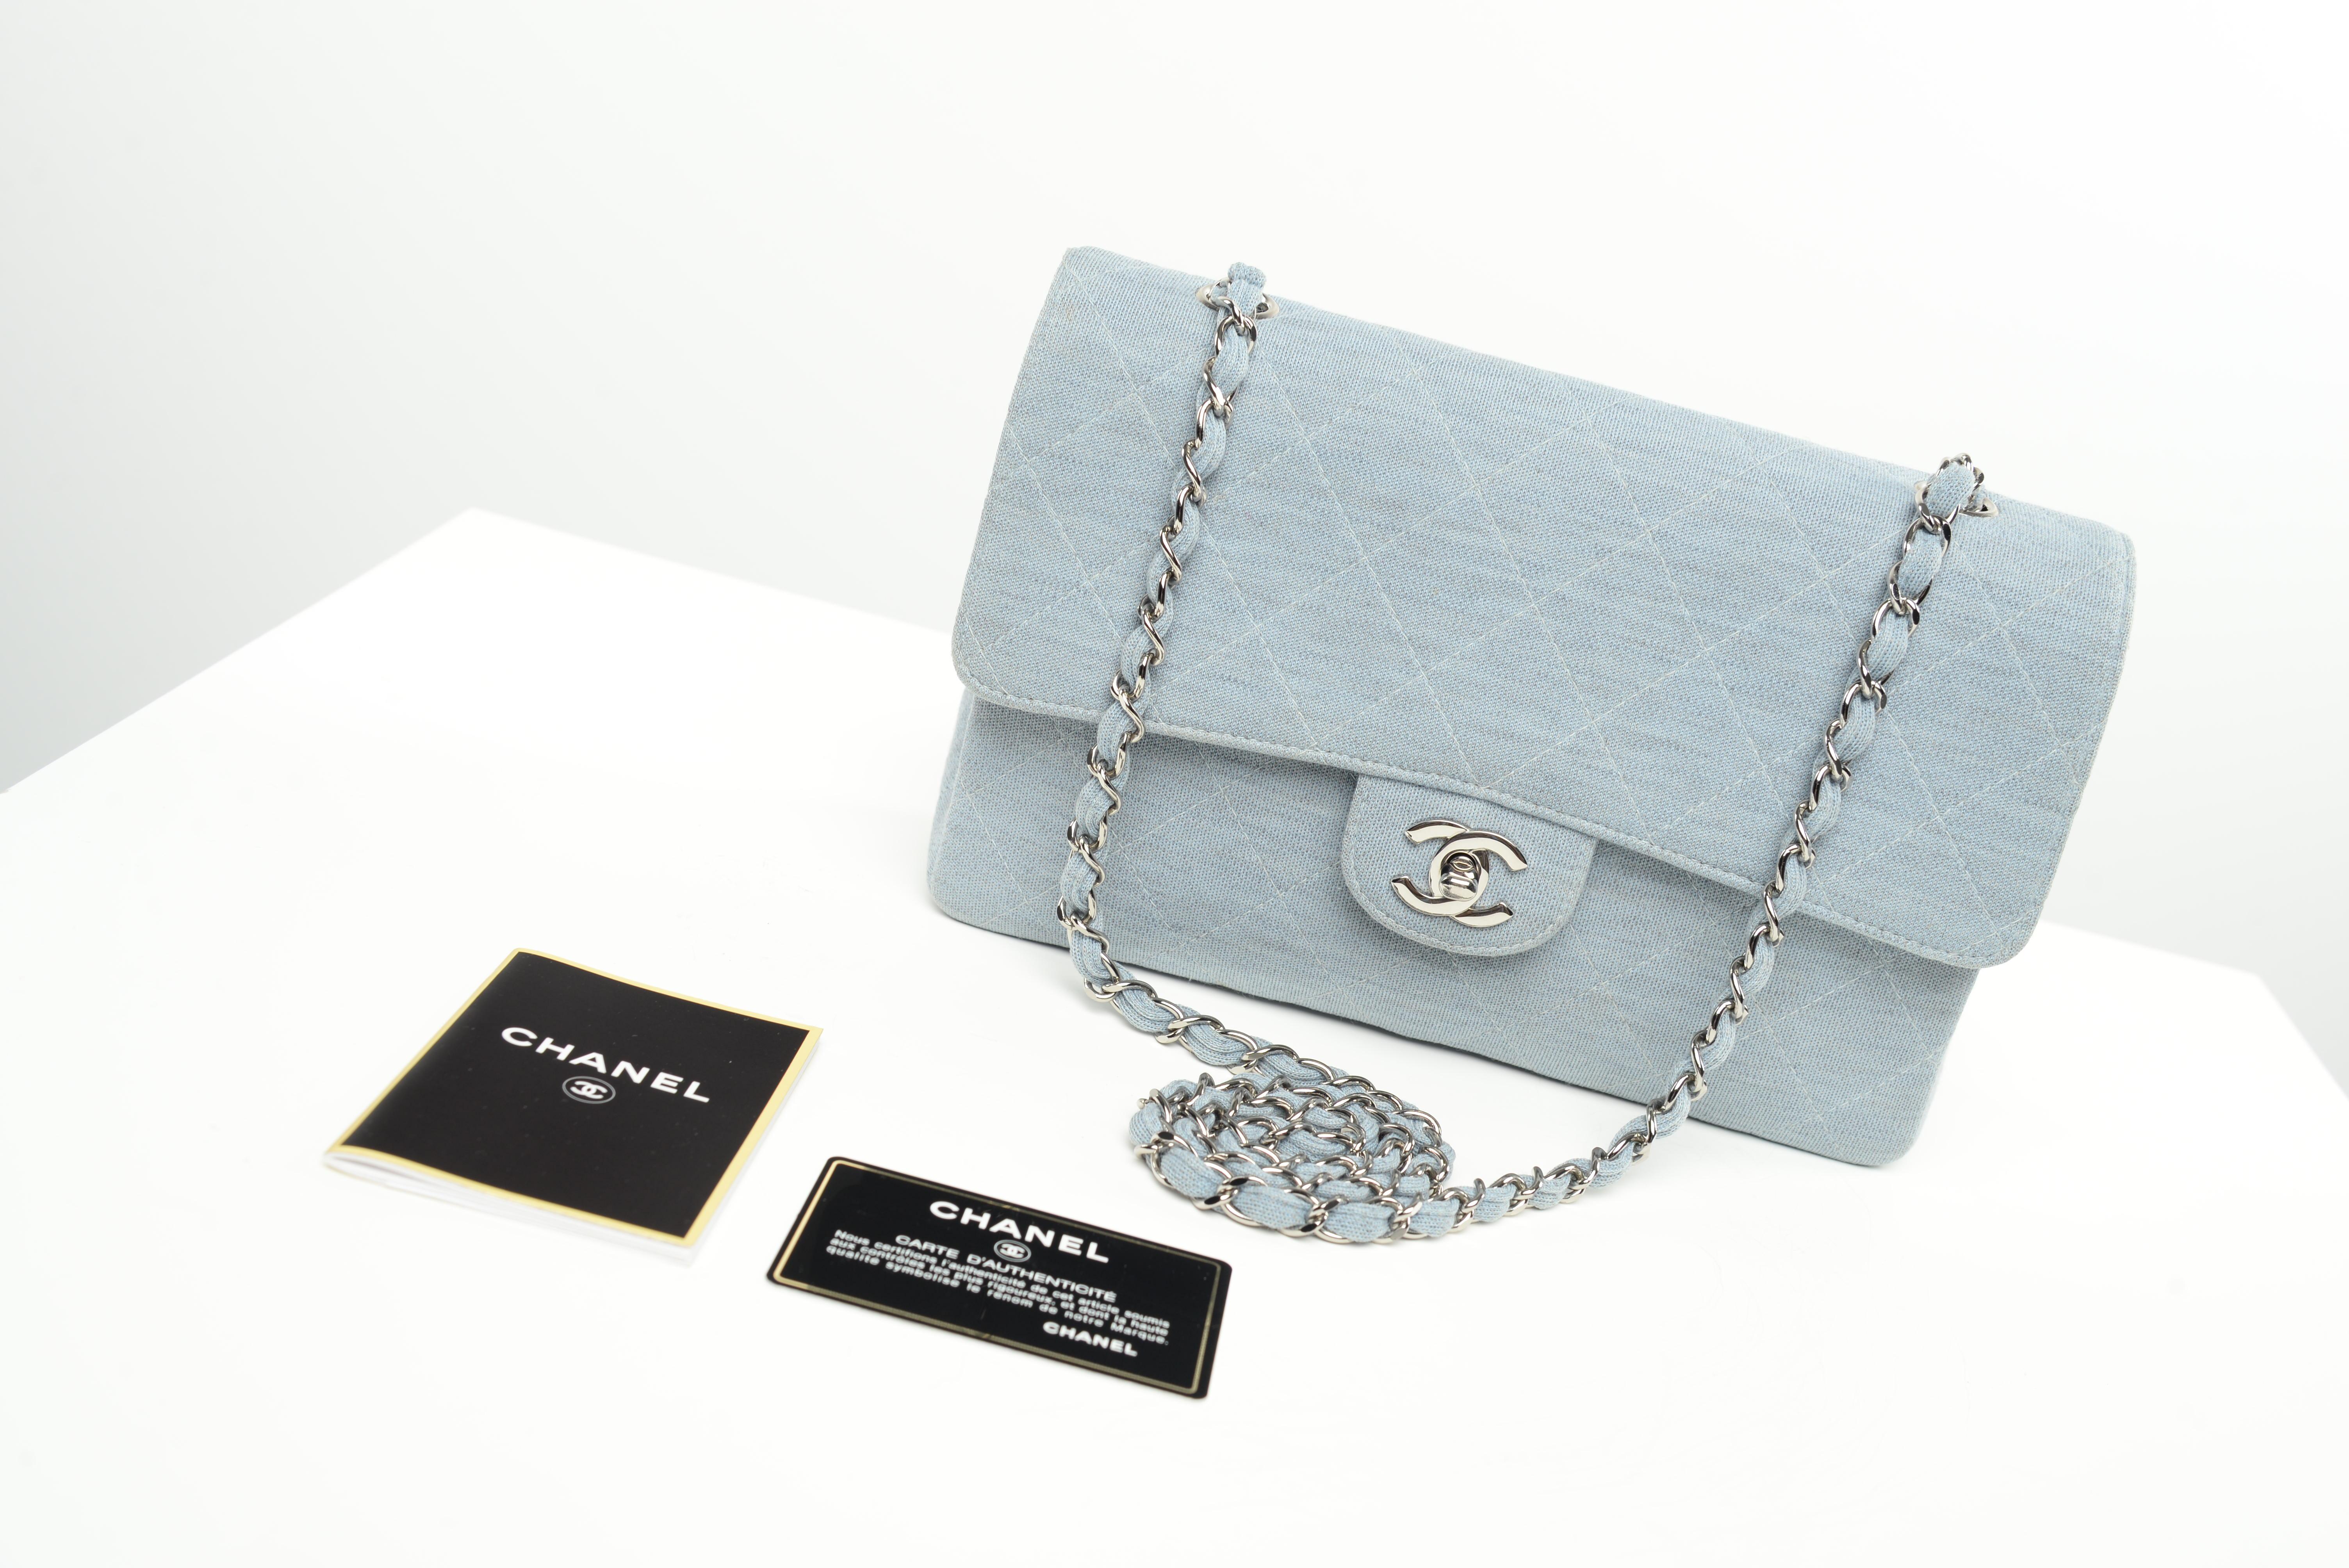 From the collection of SAVINETI we offer this Chanel Flap Bag Denim:
-	Brand: Chanel
-	Model: Single Flap Light Blue Denim Look
-       Colour: Light Blue (RARE)
-	Year: 1997-1999
-	Code: 5953664
-	Condition: Good
-	Materials: Lambskin Leather,